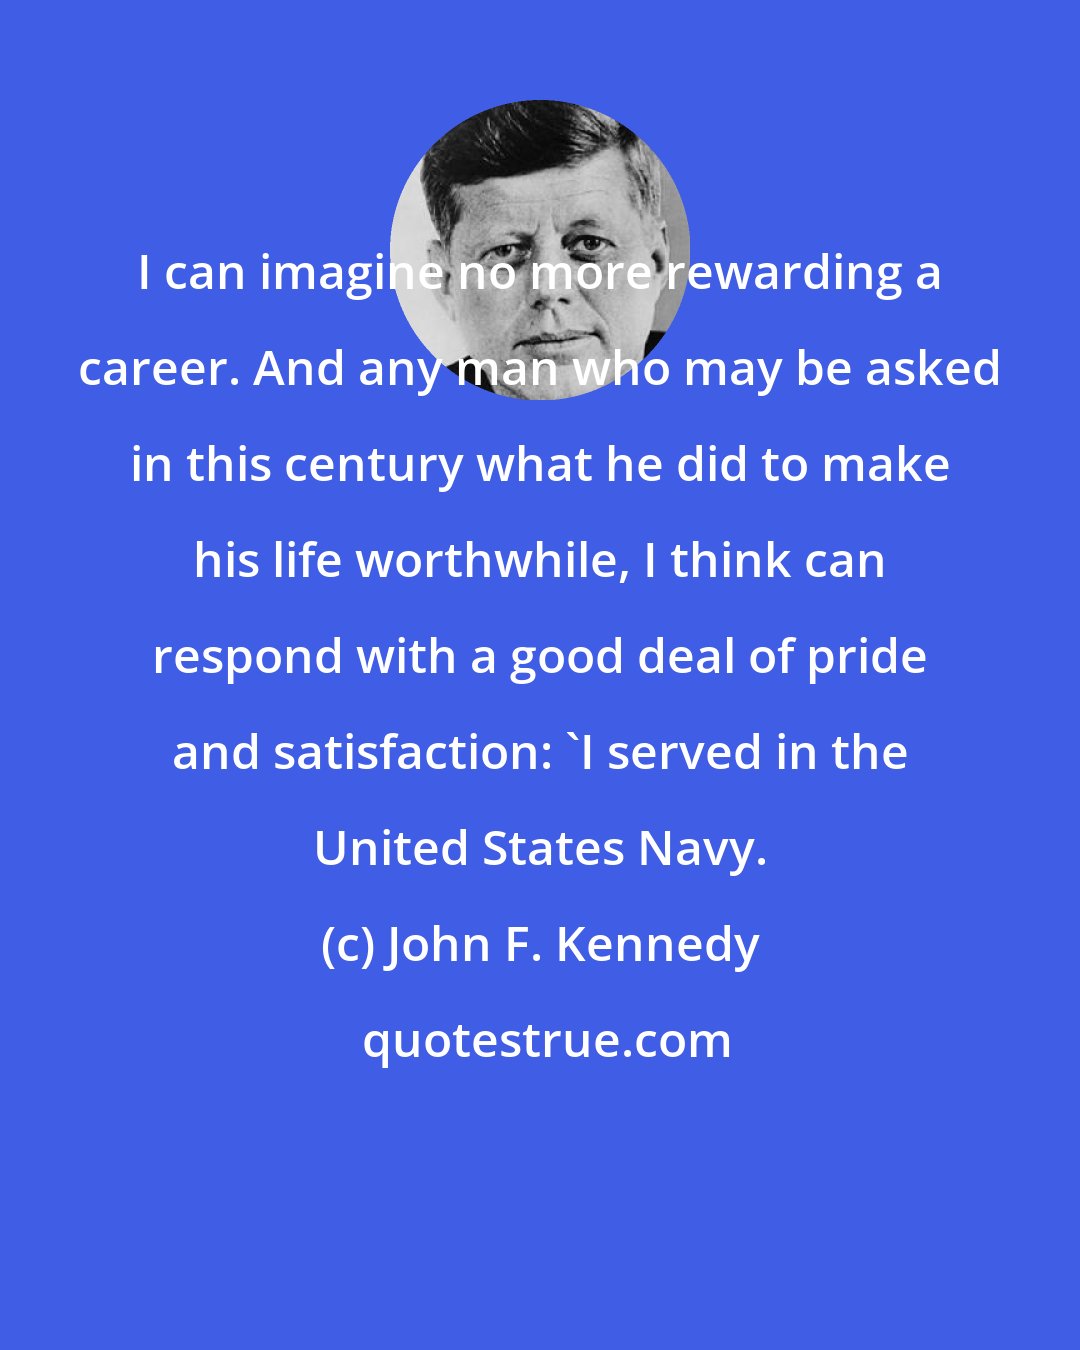 John F. Kennedy: I can imagine no more rewarding a career. And any man who may be asked in this century what he did to make his life worthwhile, I think can respond with a good deal of pride and satisfaction: 'I served in the United States Navy.